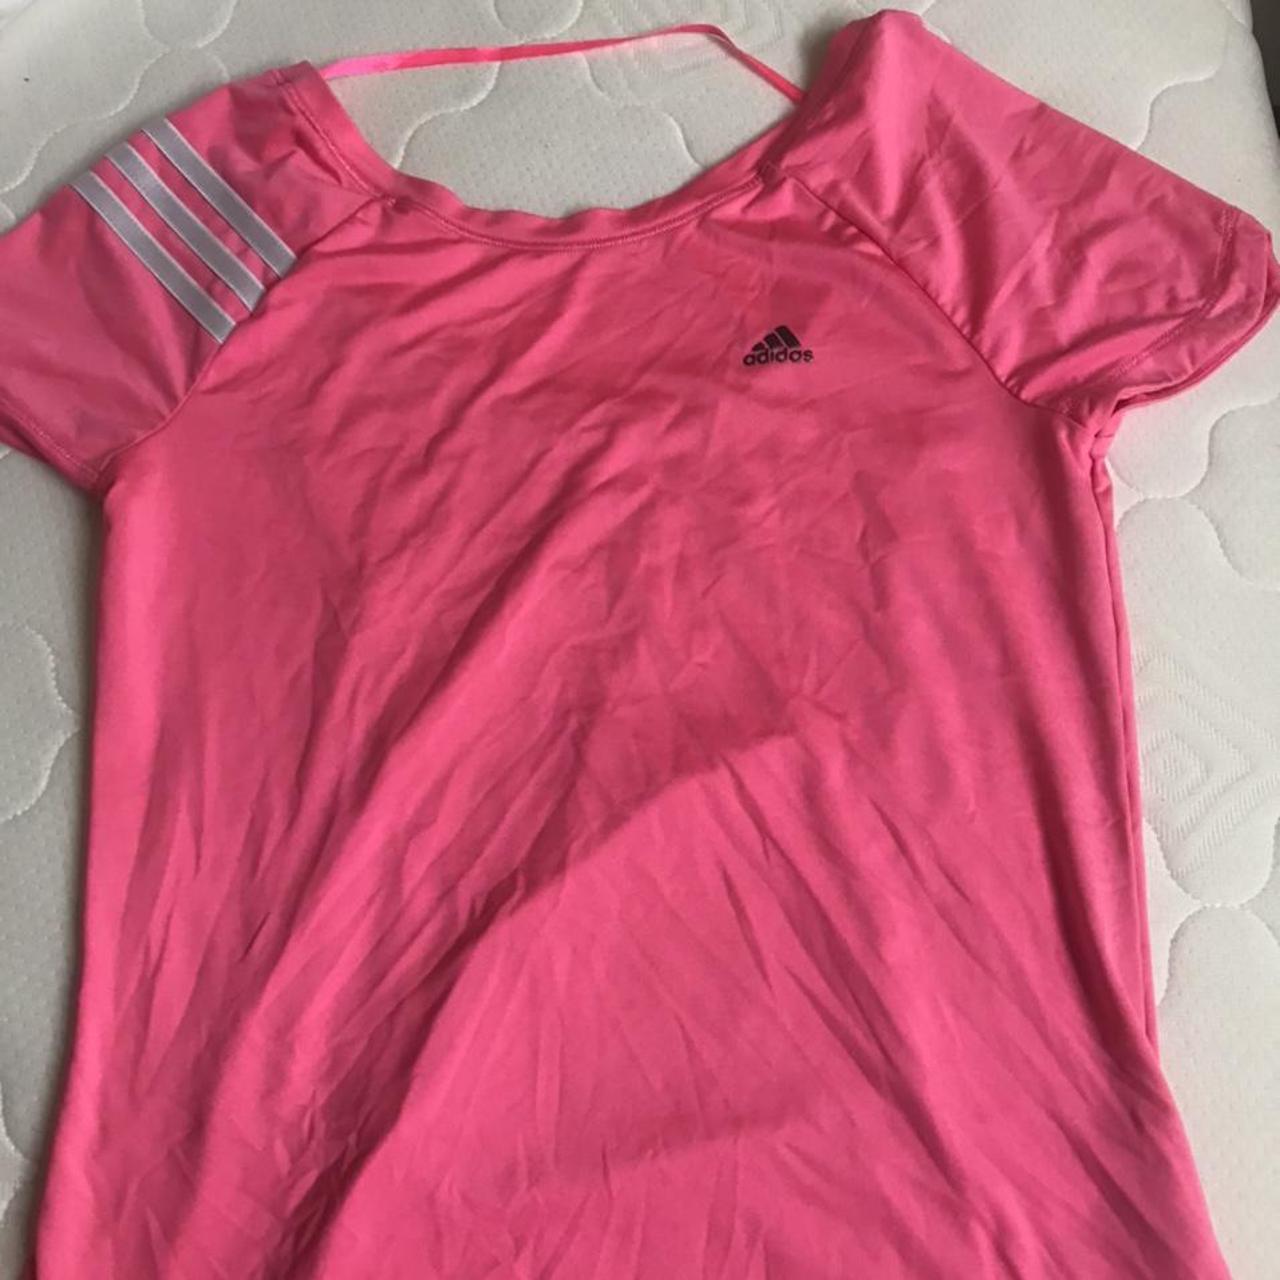 ADIDAS NEON PINK CLIMA COOL RUNNING TOP SIZE: XS... - Depop